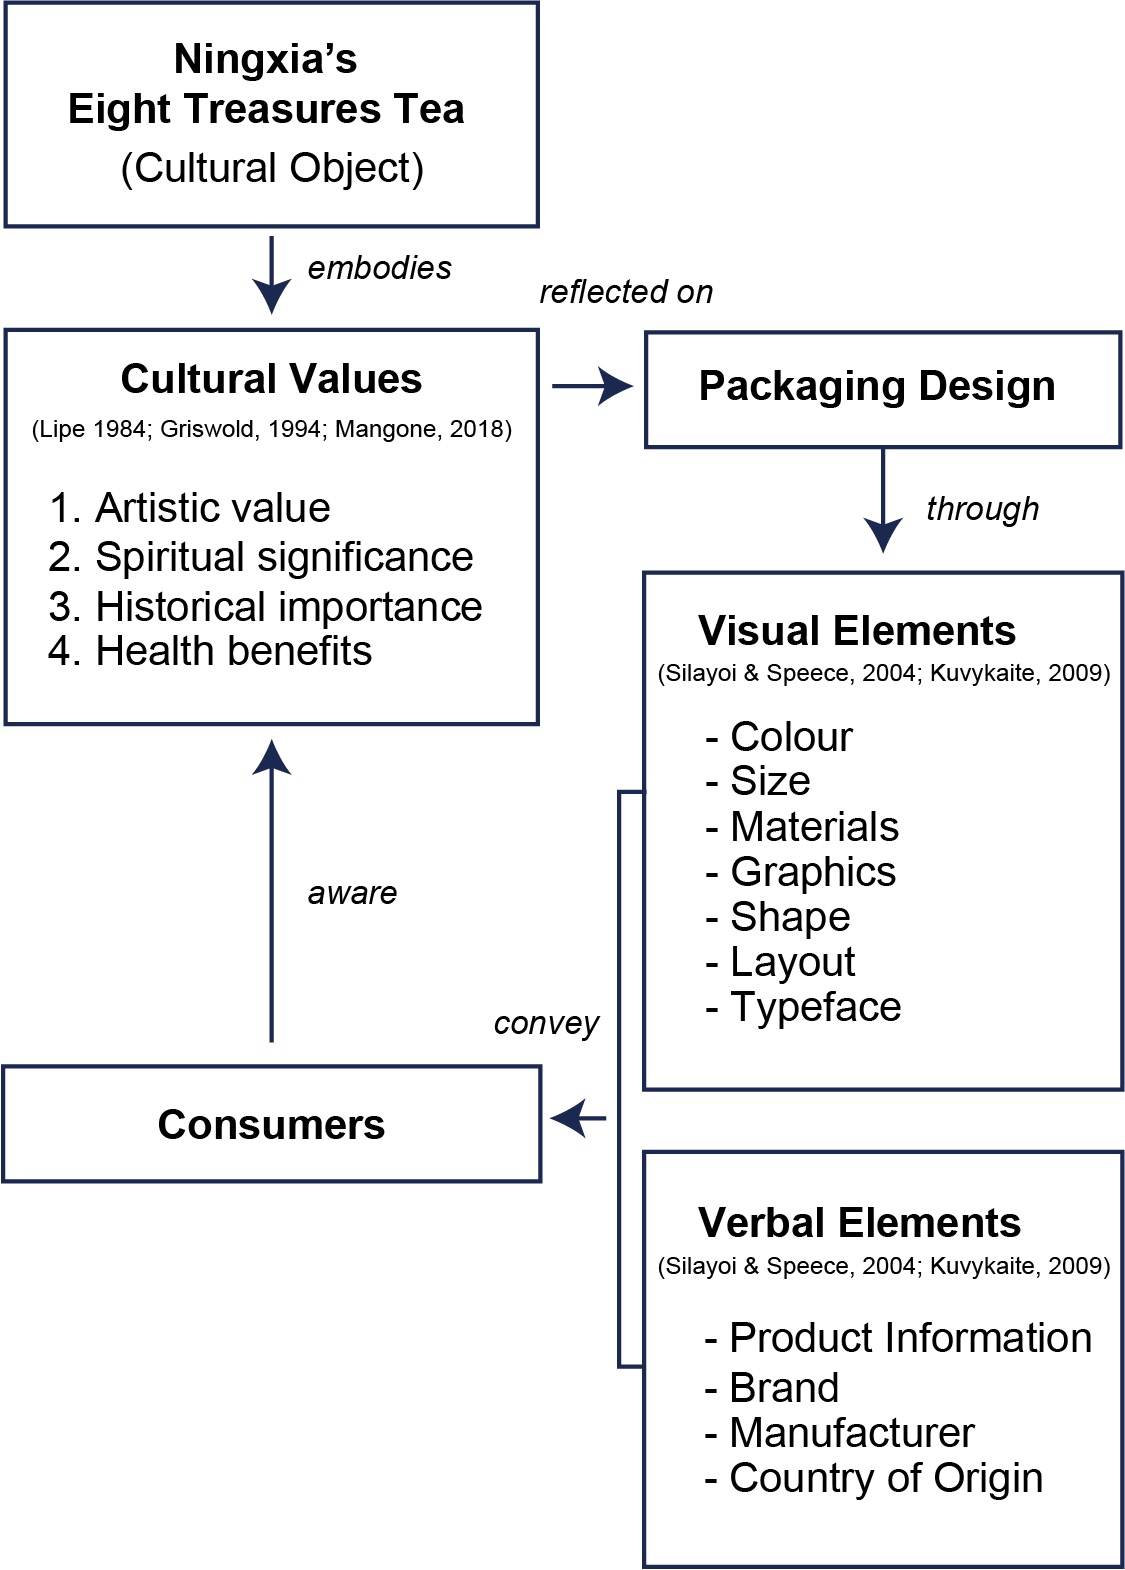 Index terms: Cultural values; Ningxia’s Eight Treasures Tea; Practice-based research; Packaging design